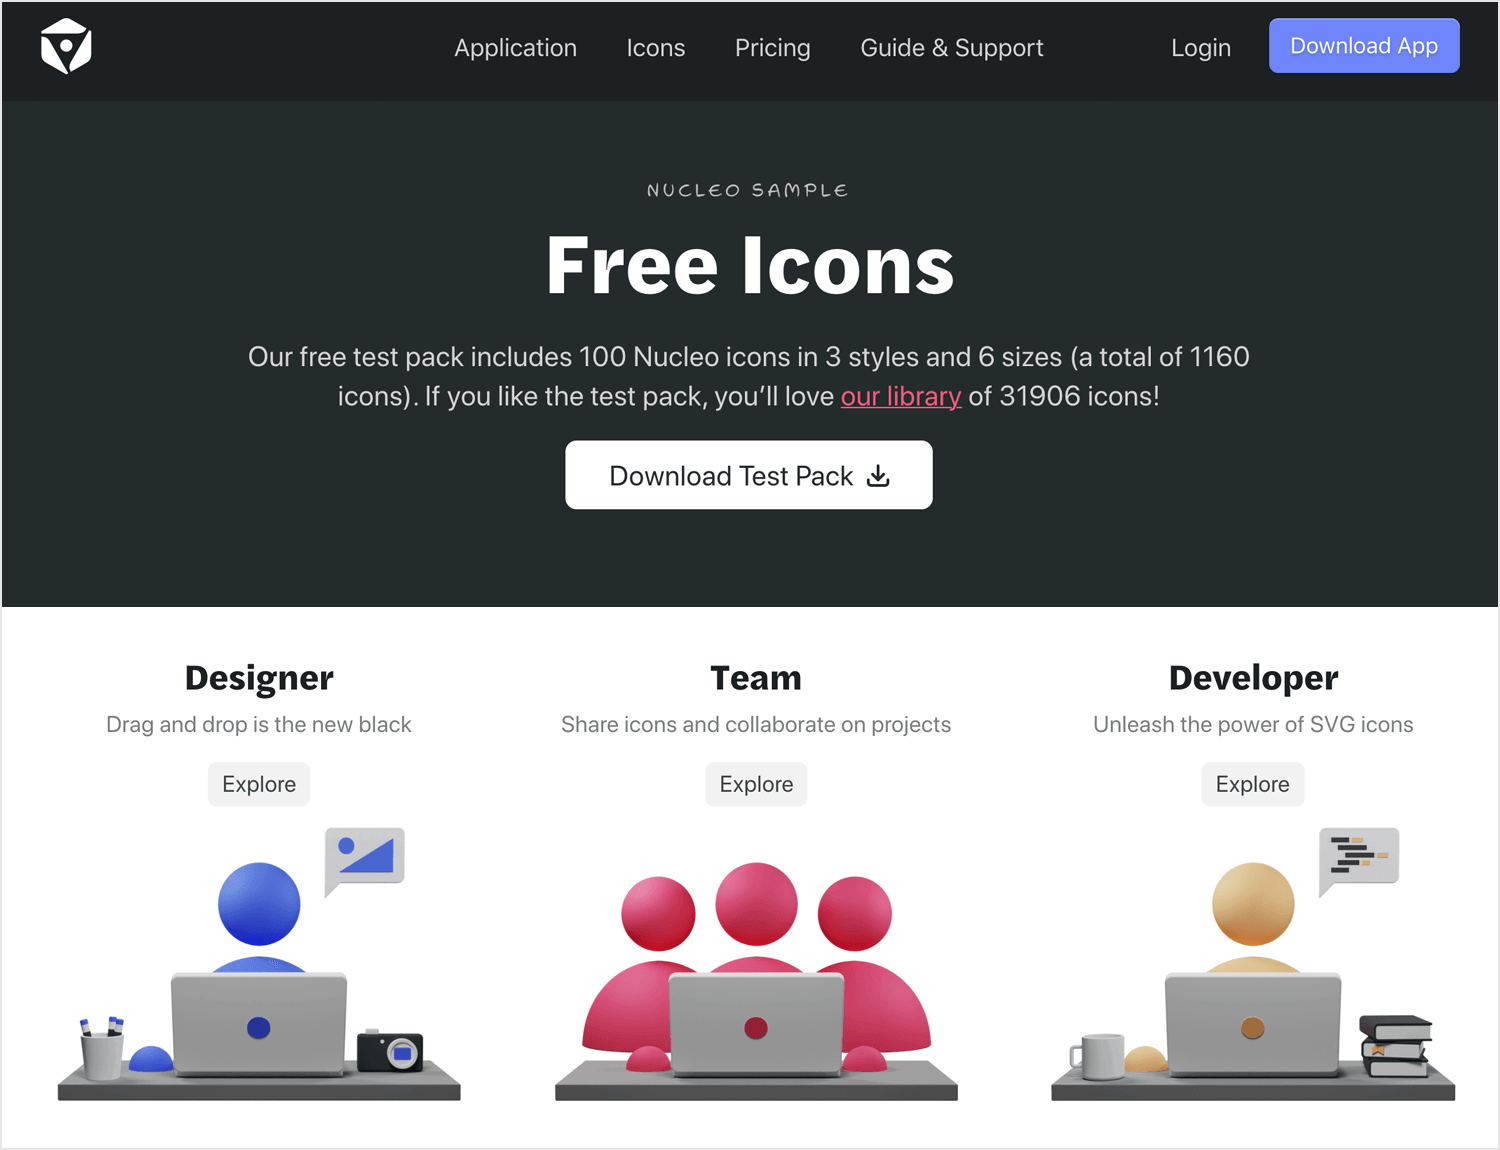 Free app icons to download - Nucleoapp